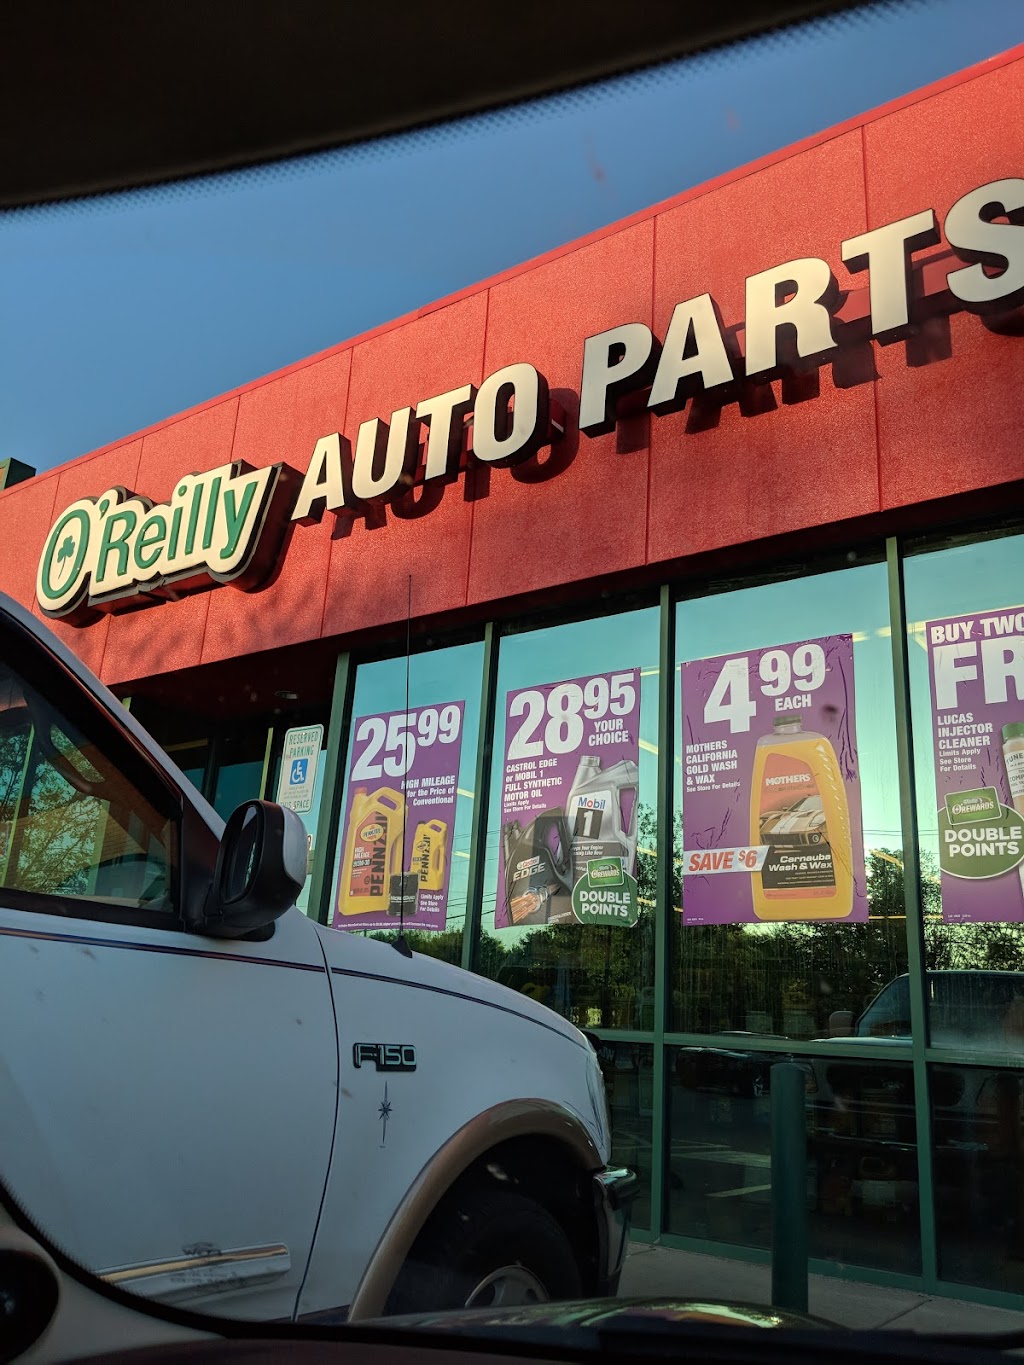 OReilly Auto Parts | 1209 S Water Ave, Gallatin, TN 37066 | Phone: (615) 452-4925